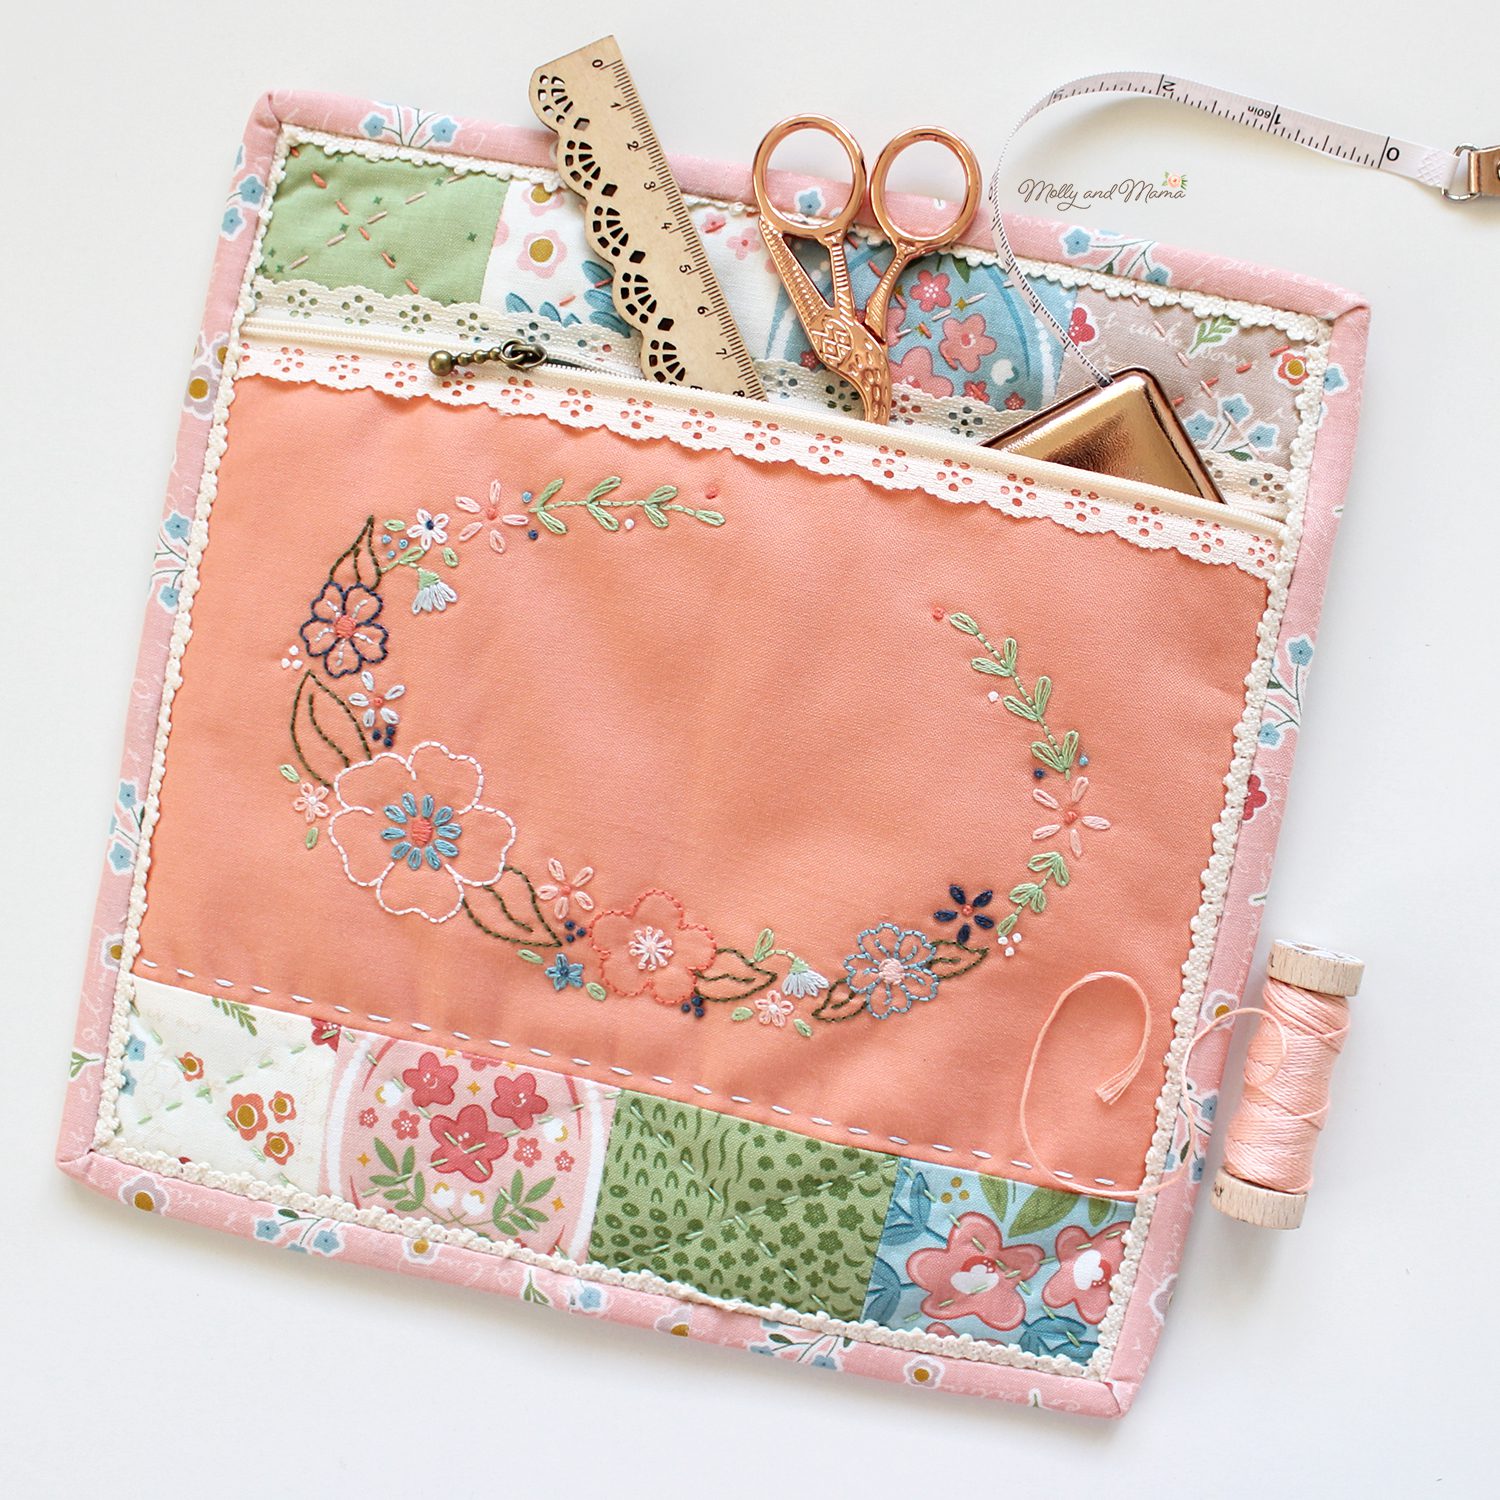 A New Spring Fling Pouch in Primrose Hill